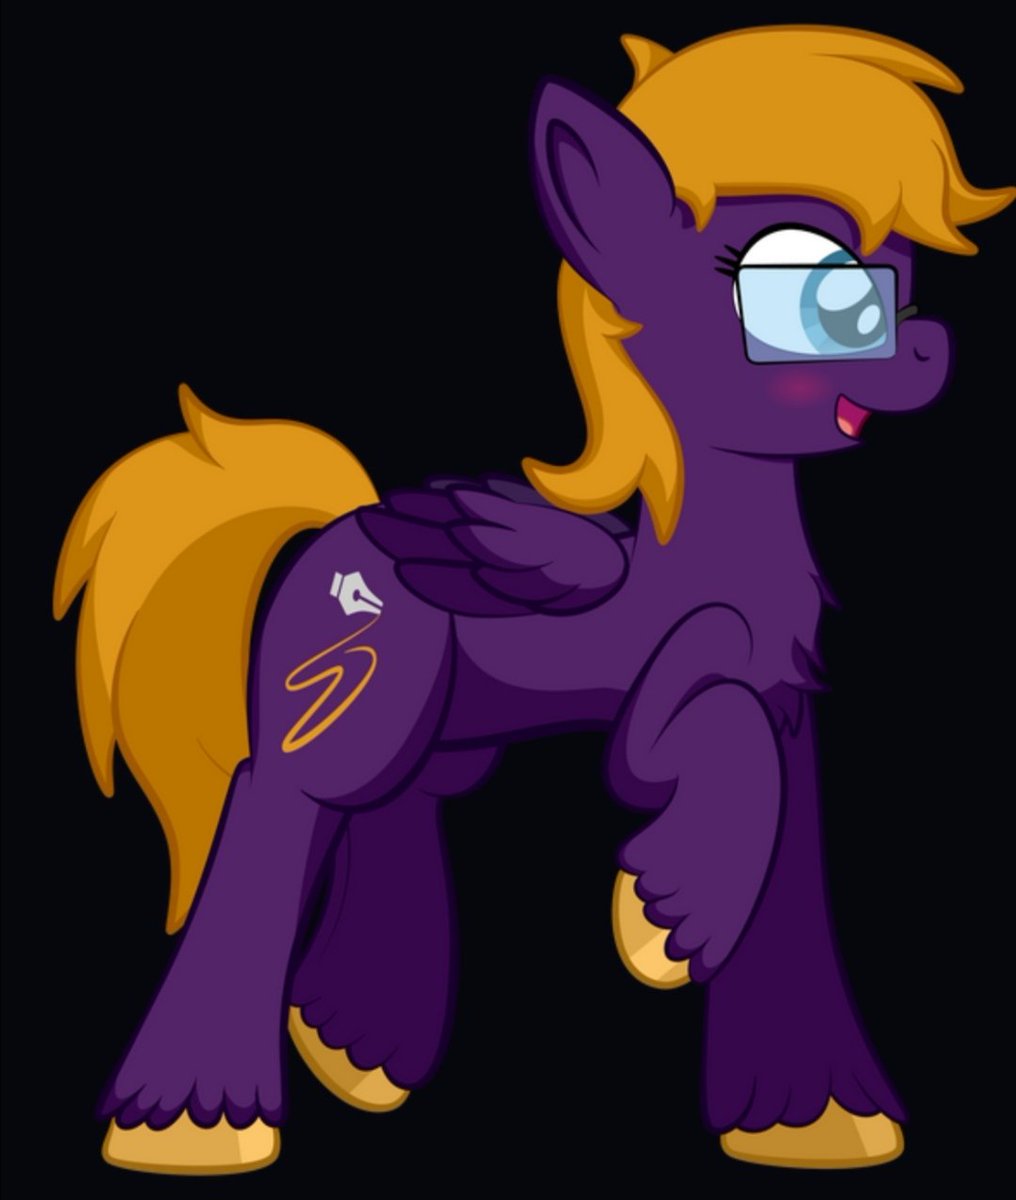 Purple's knock off
But I habe to admit, round glasses might look better on my sona